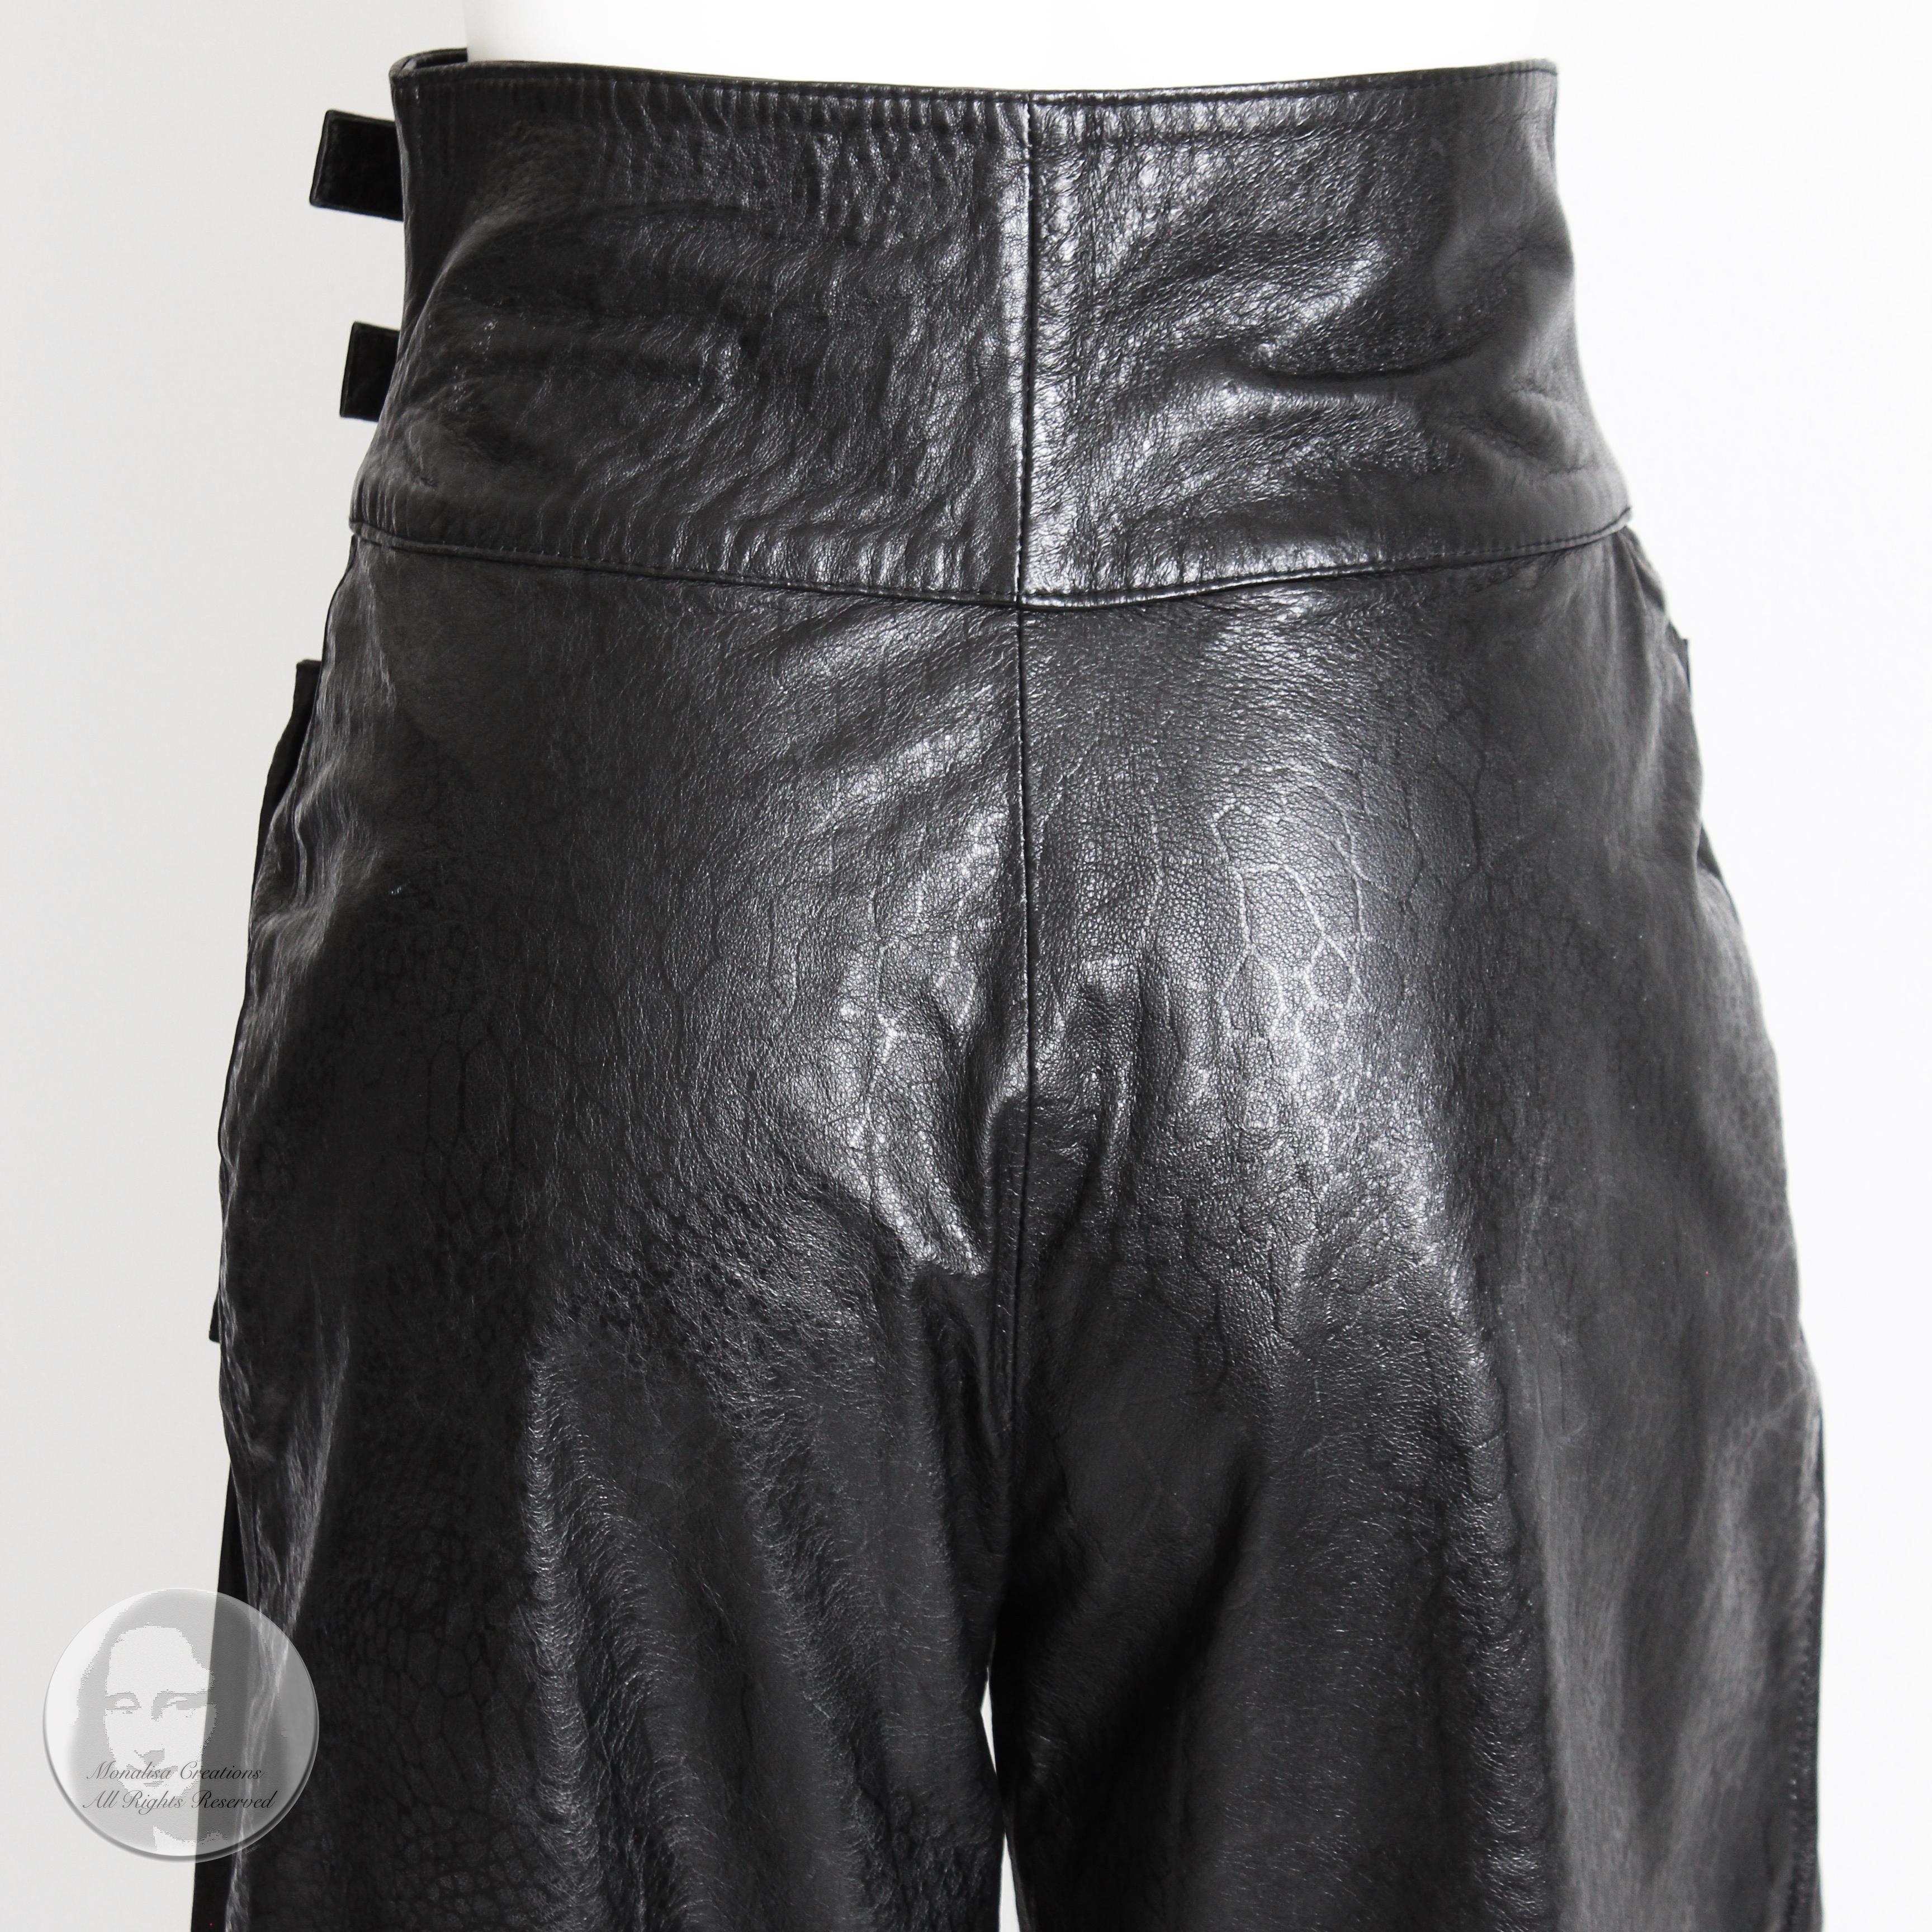 Beged-Or Leather Pants Made in Israel Black Vintage 80s Sz 40 NWT New Old Stock 2